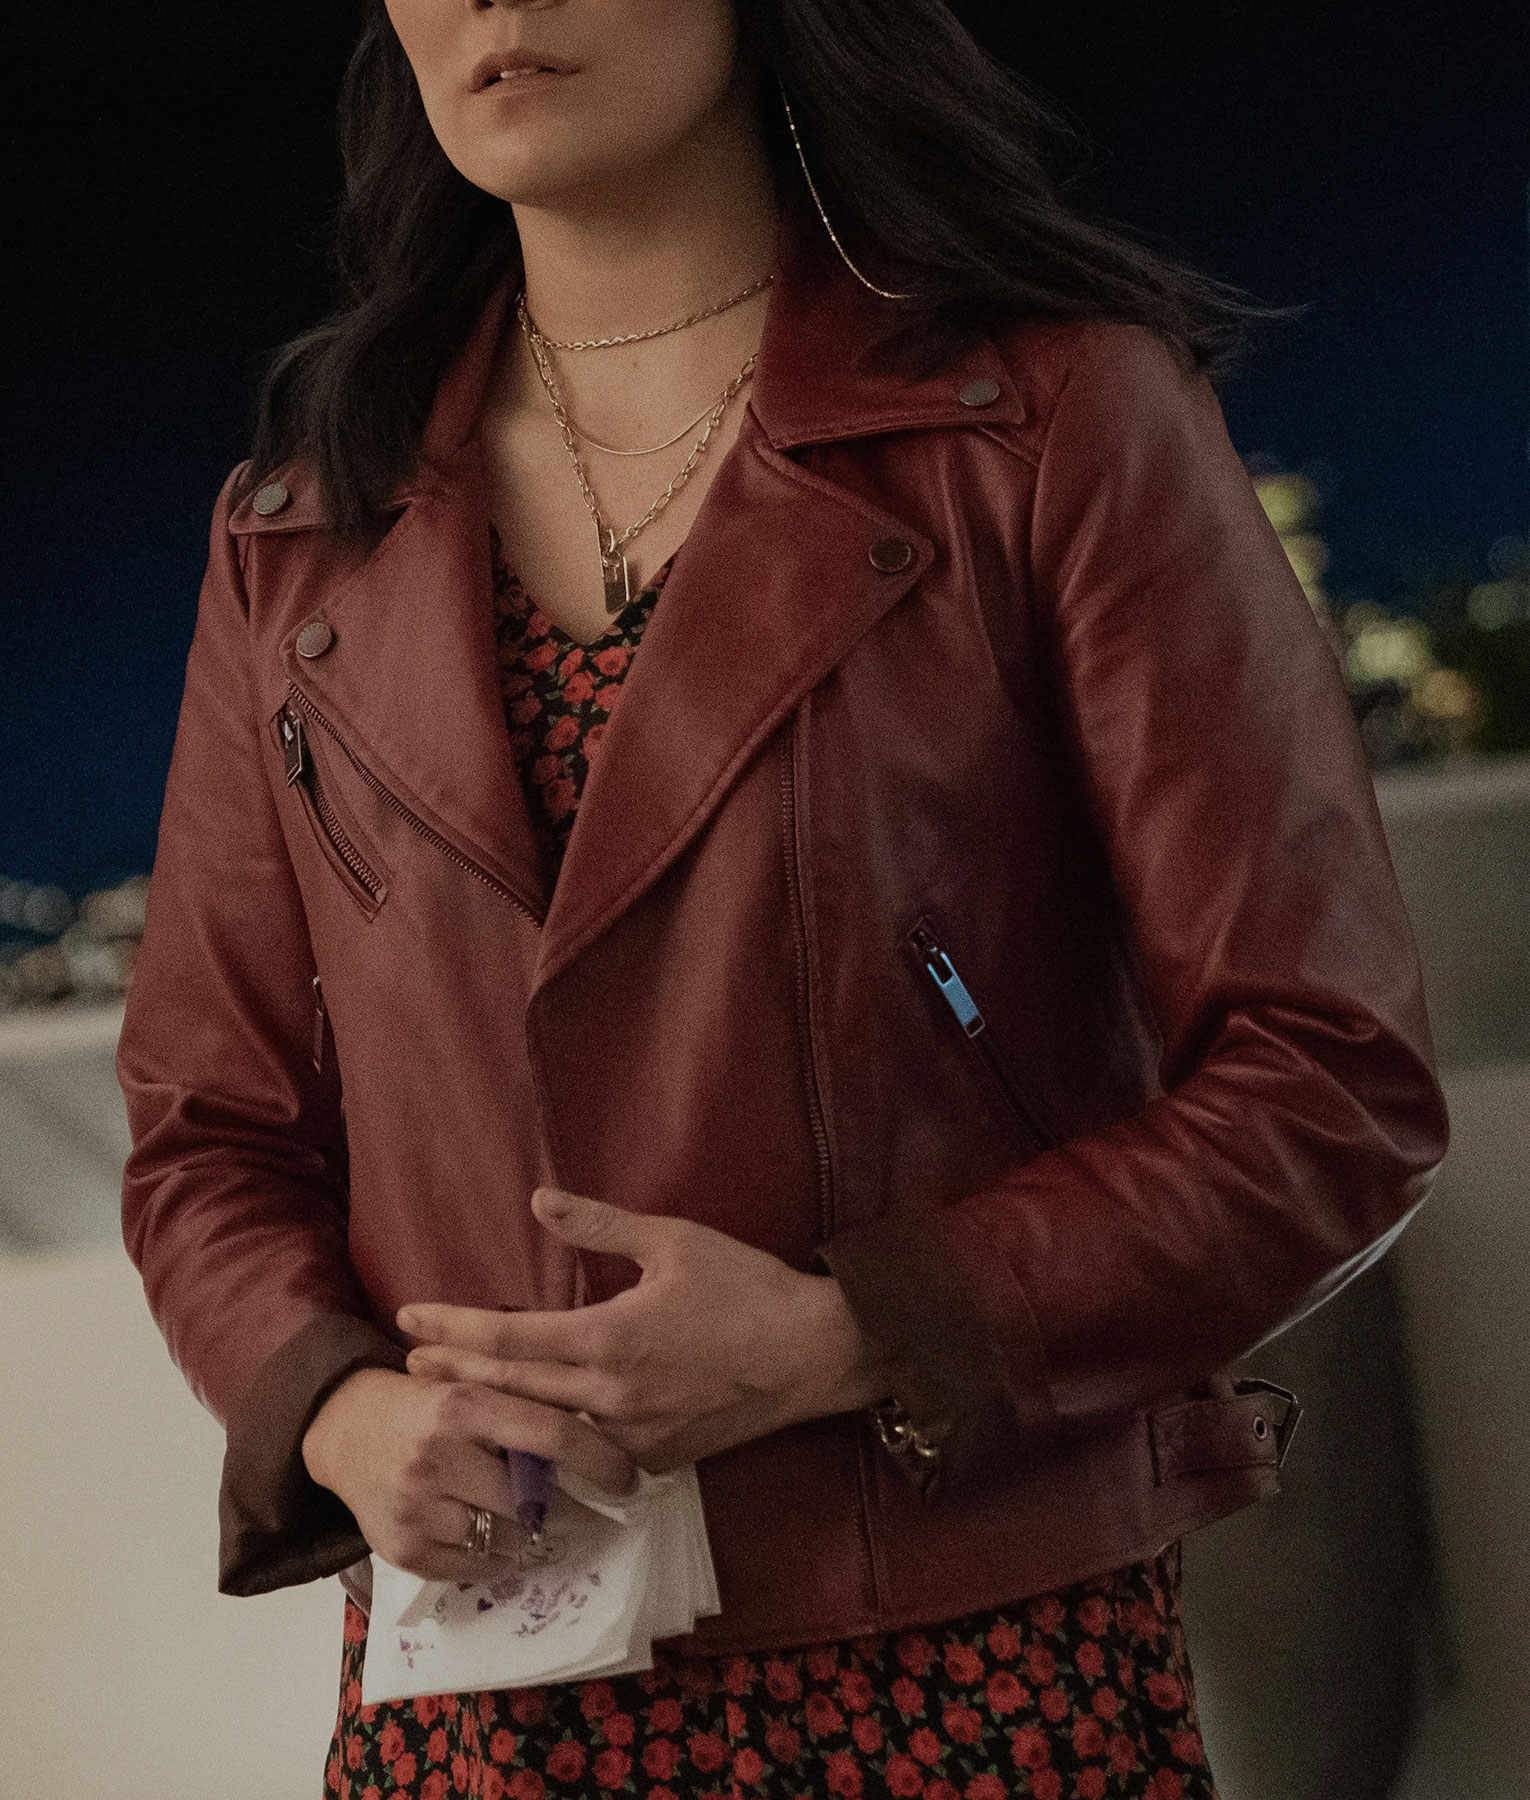 The Afterparty Zoe Chao Maroon Leather Jacket-1